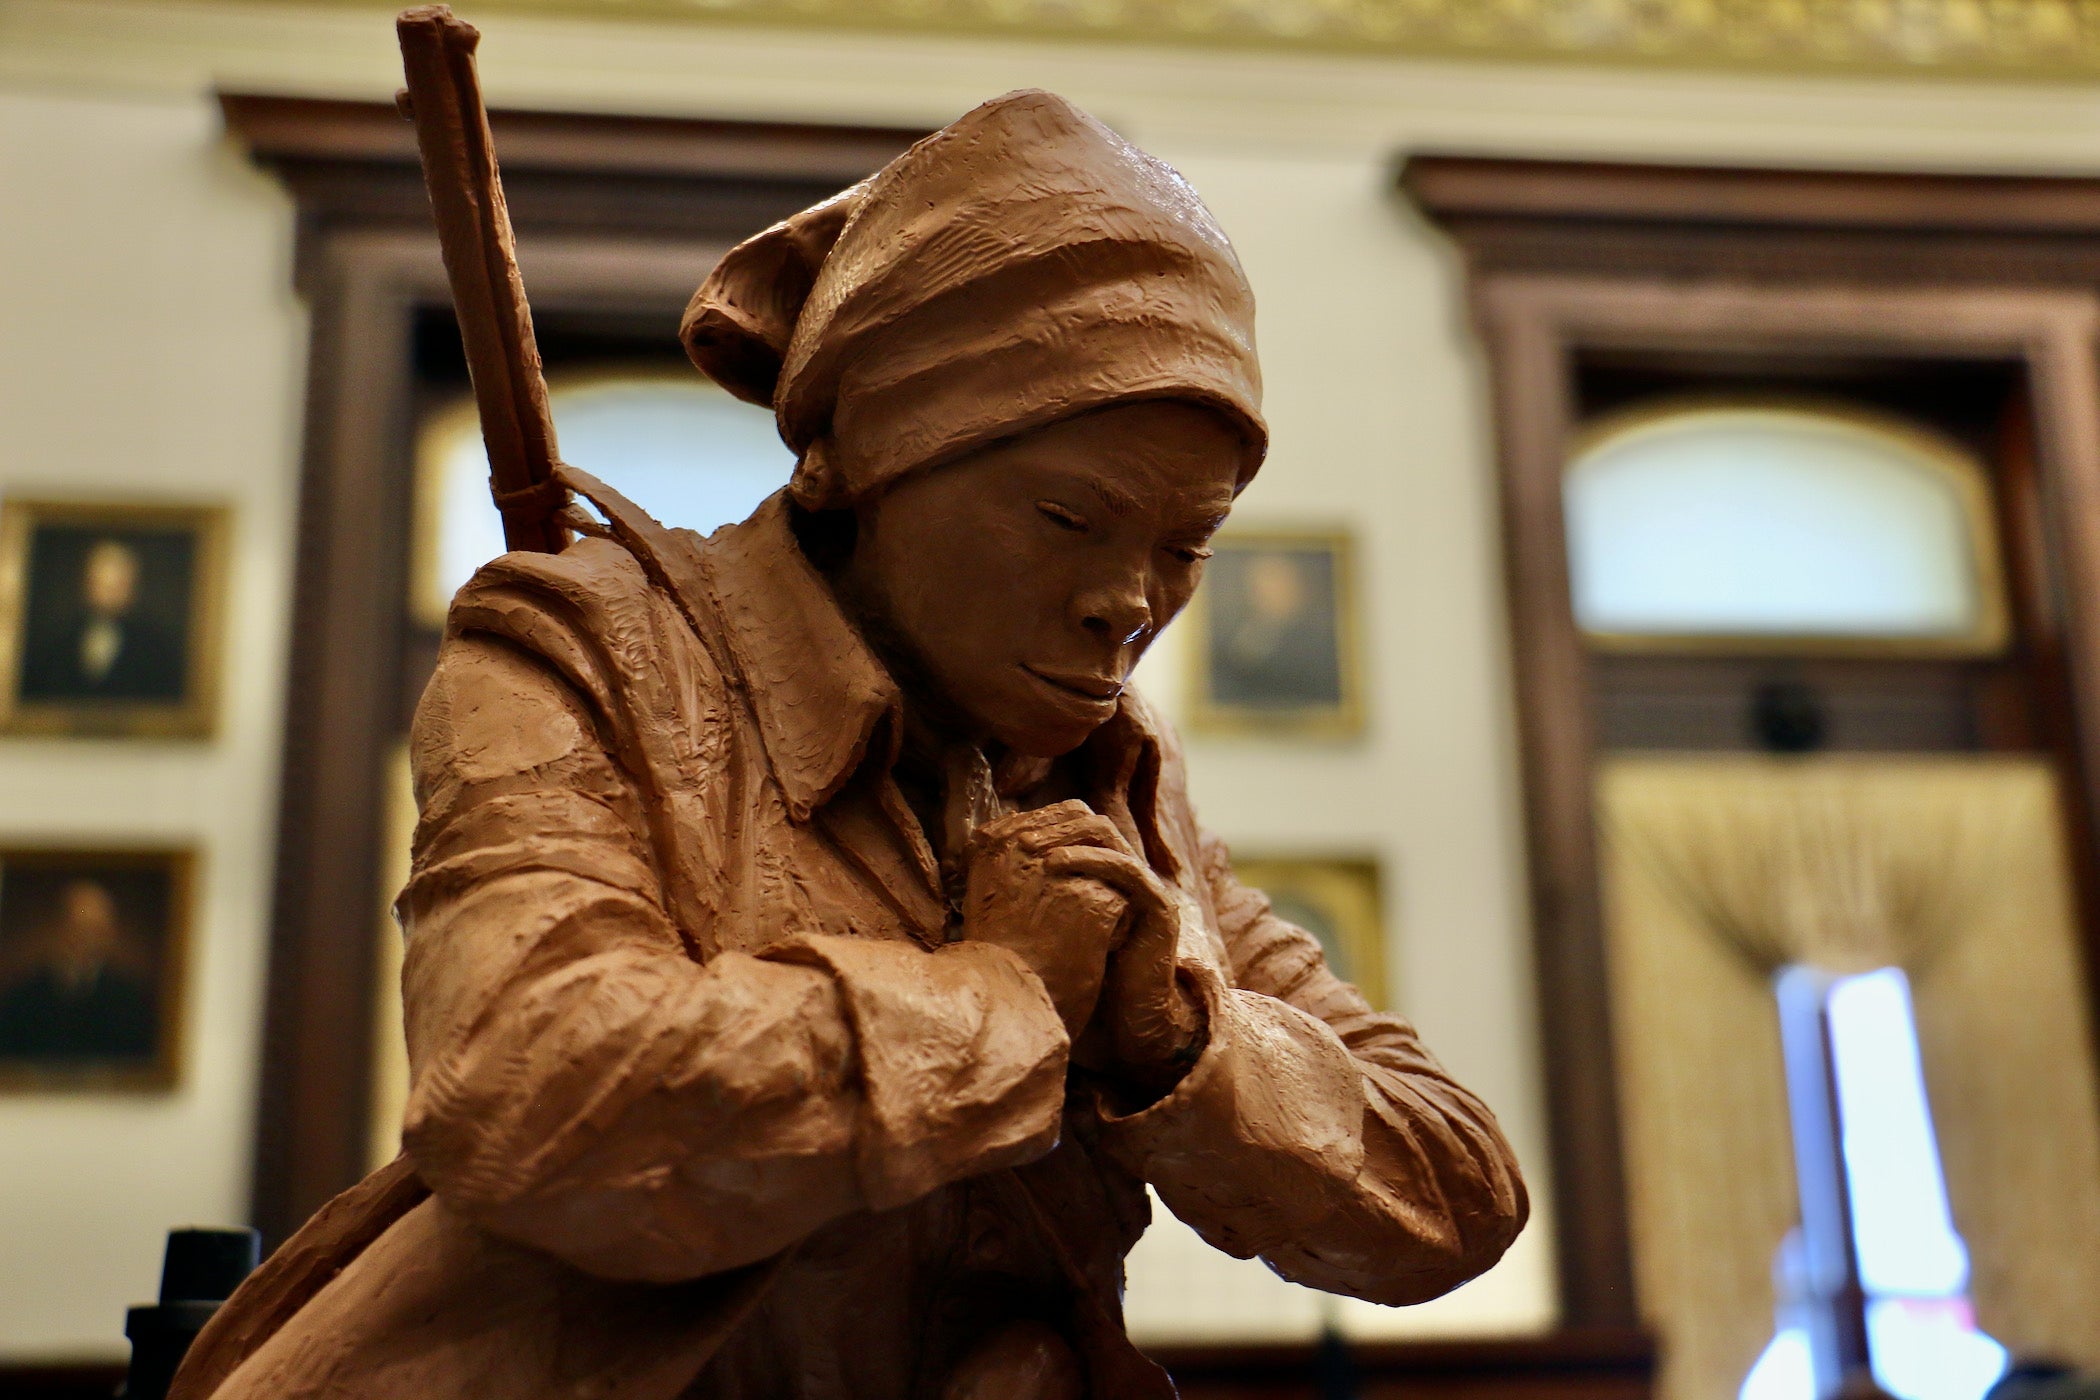 Design for Philly's new Harriet Tubman statue unveiled - WHYY